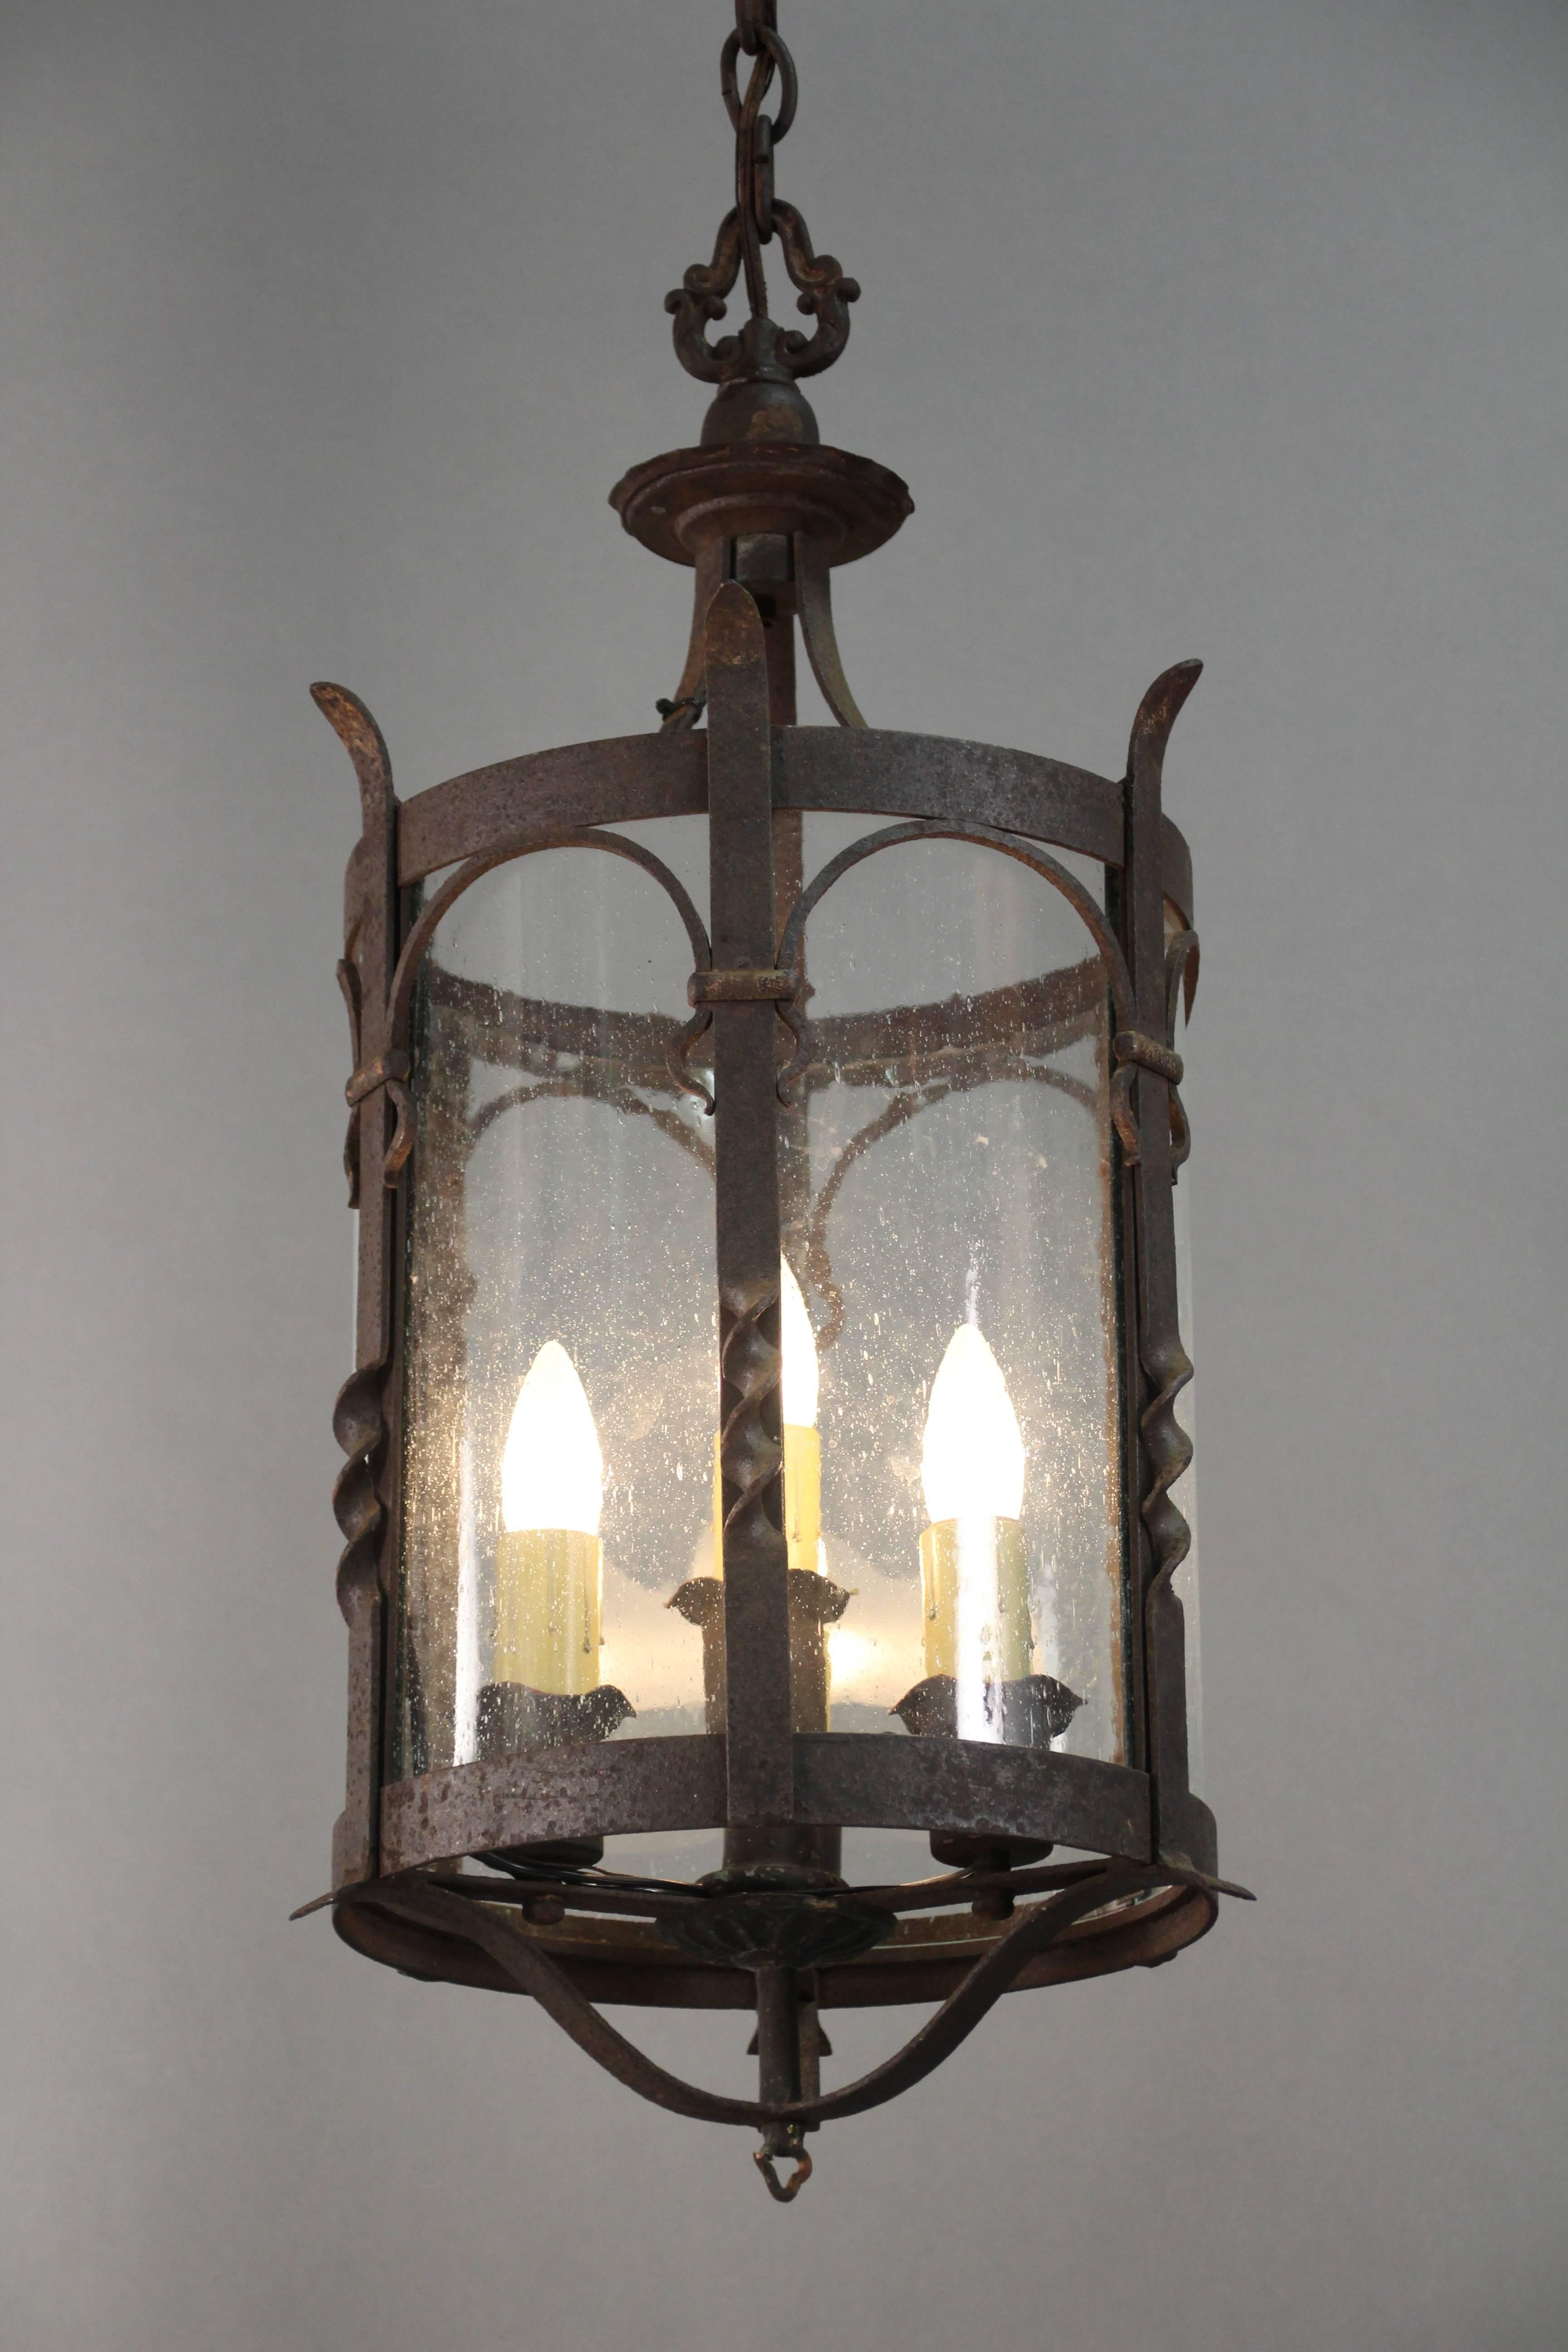 Wrought iron pendant with glass with three lights. Original finish.